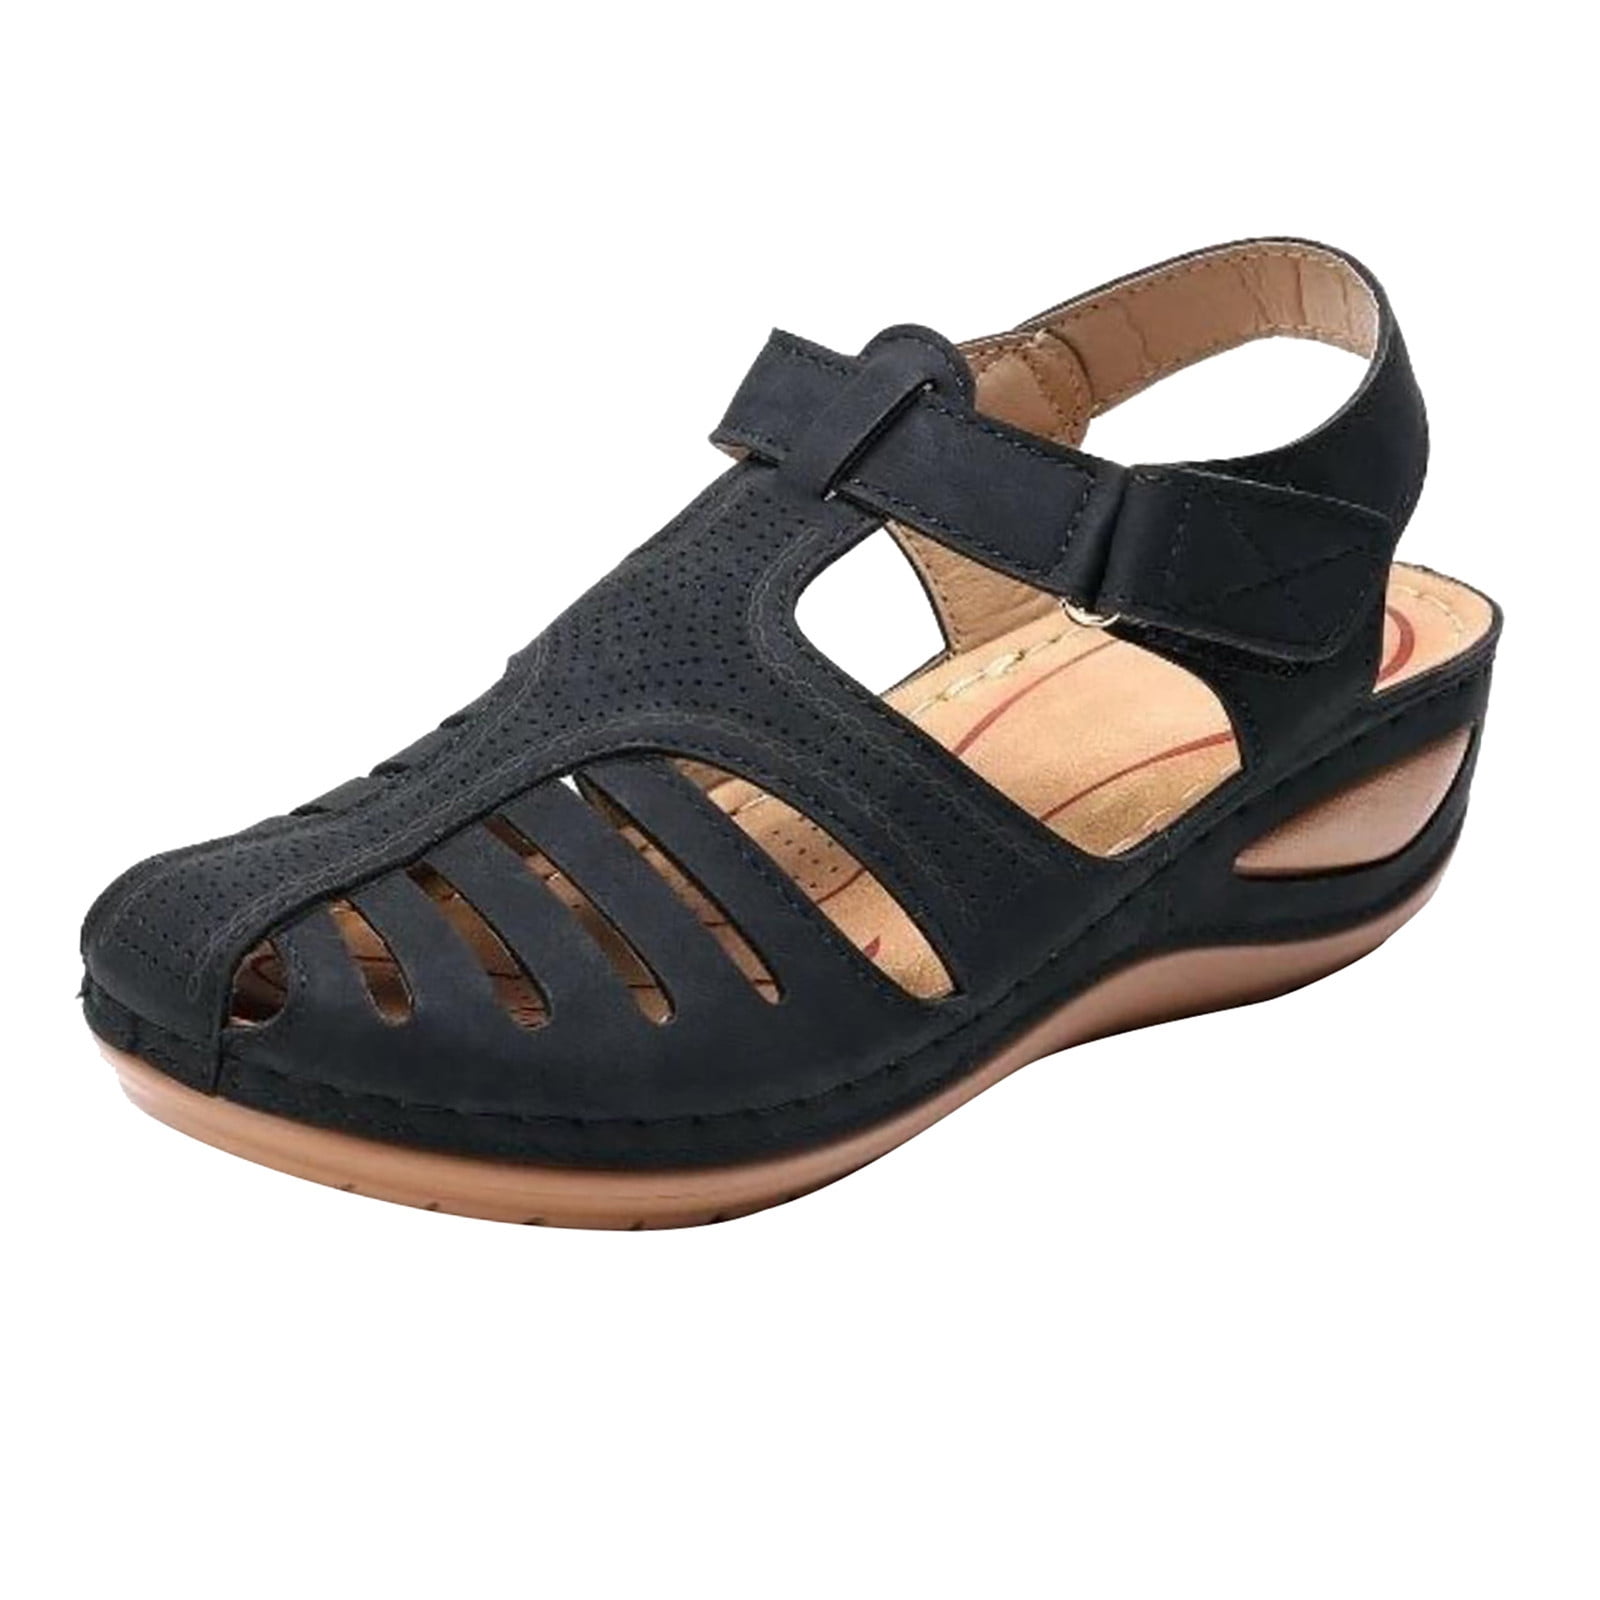 Womens Wedge Sandals Closed Toe Comfort Hook and Loop Summer Outdoor Athletic Sandals Walking Shoes 